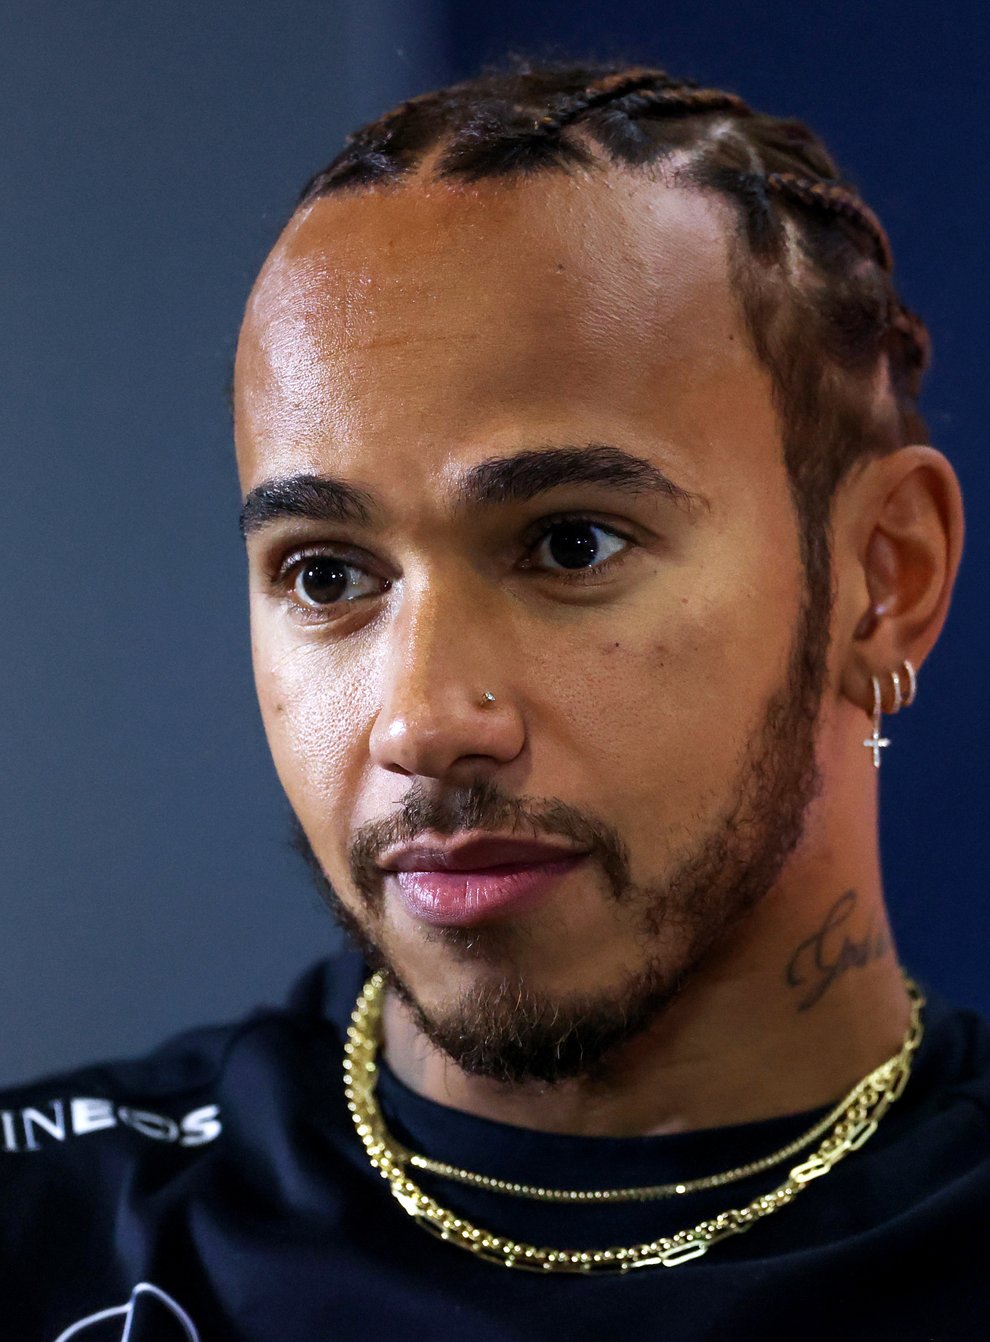 Hamilton has apologised to a Red Bull chief